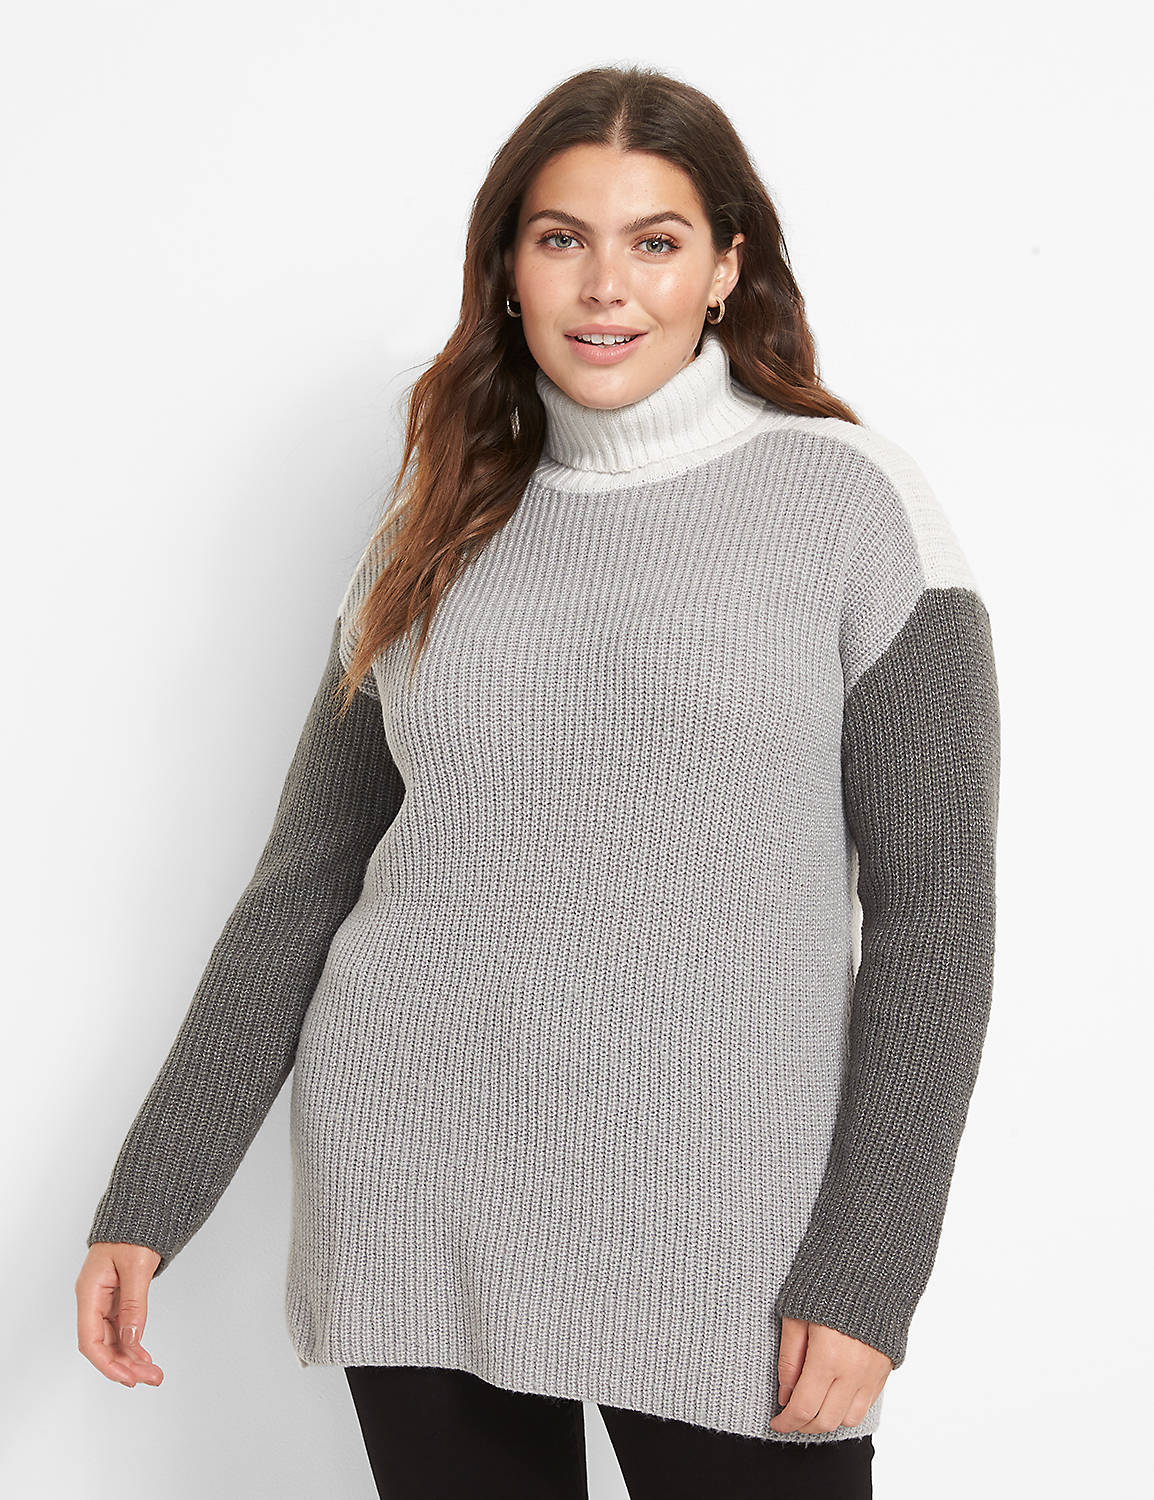 Long Sleeve Turtleneck Colorblock Pullover 1124657:BC04 Heather grey:10/12 Product Image 1